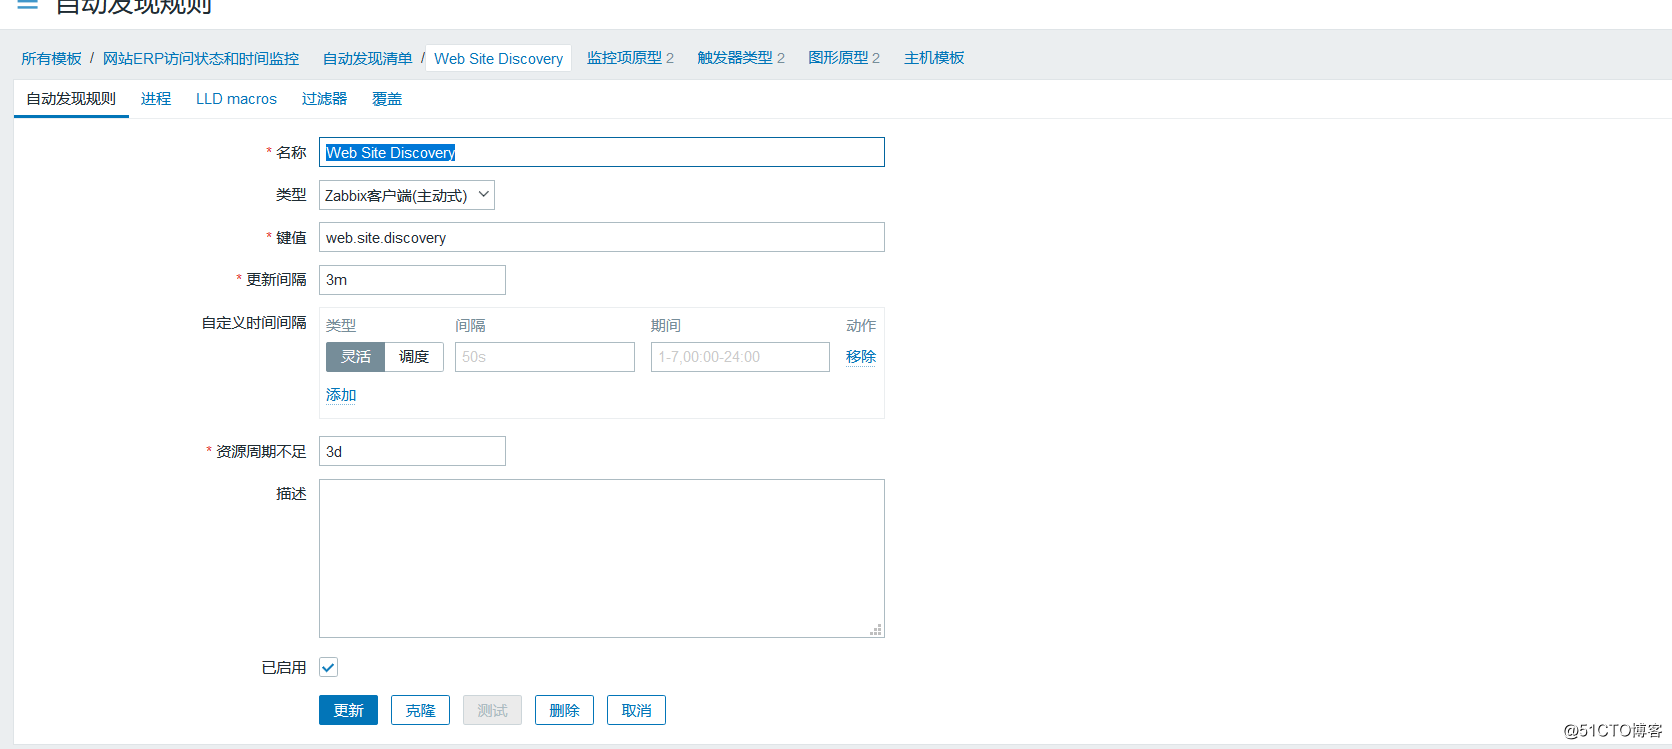 4: zabbix5.0 automatically discovers website domain names and monitors access status and request time